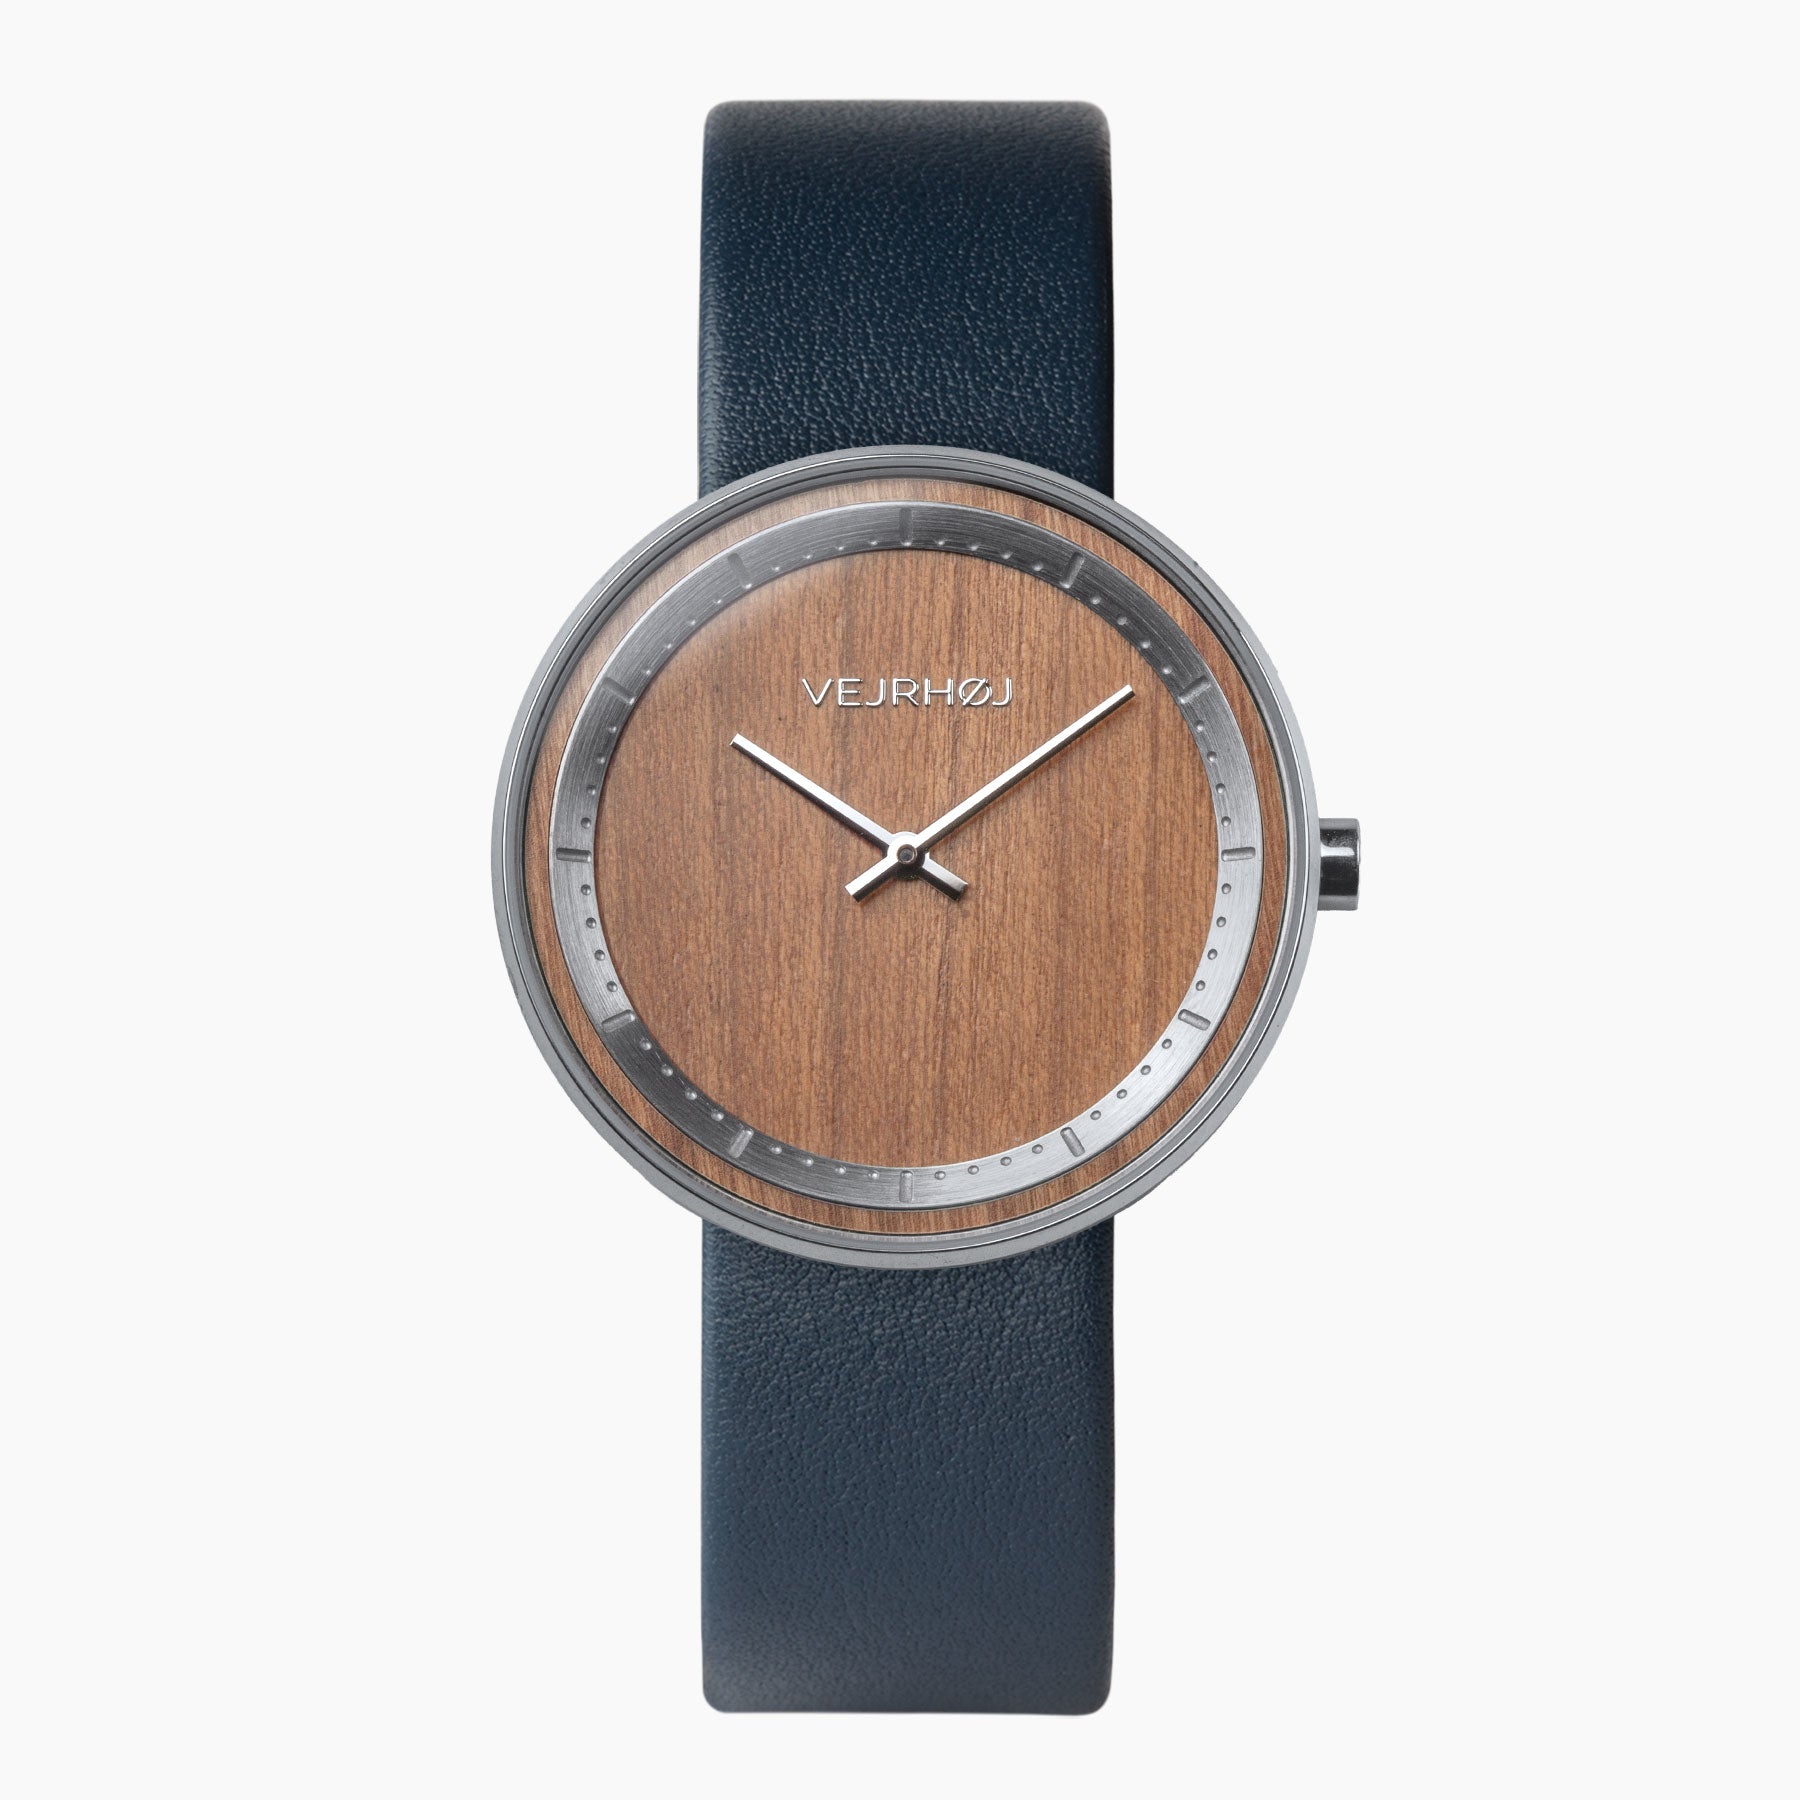 Wooden watch with steel casing and blue straps